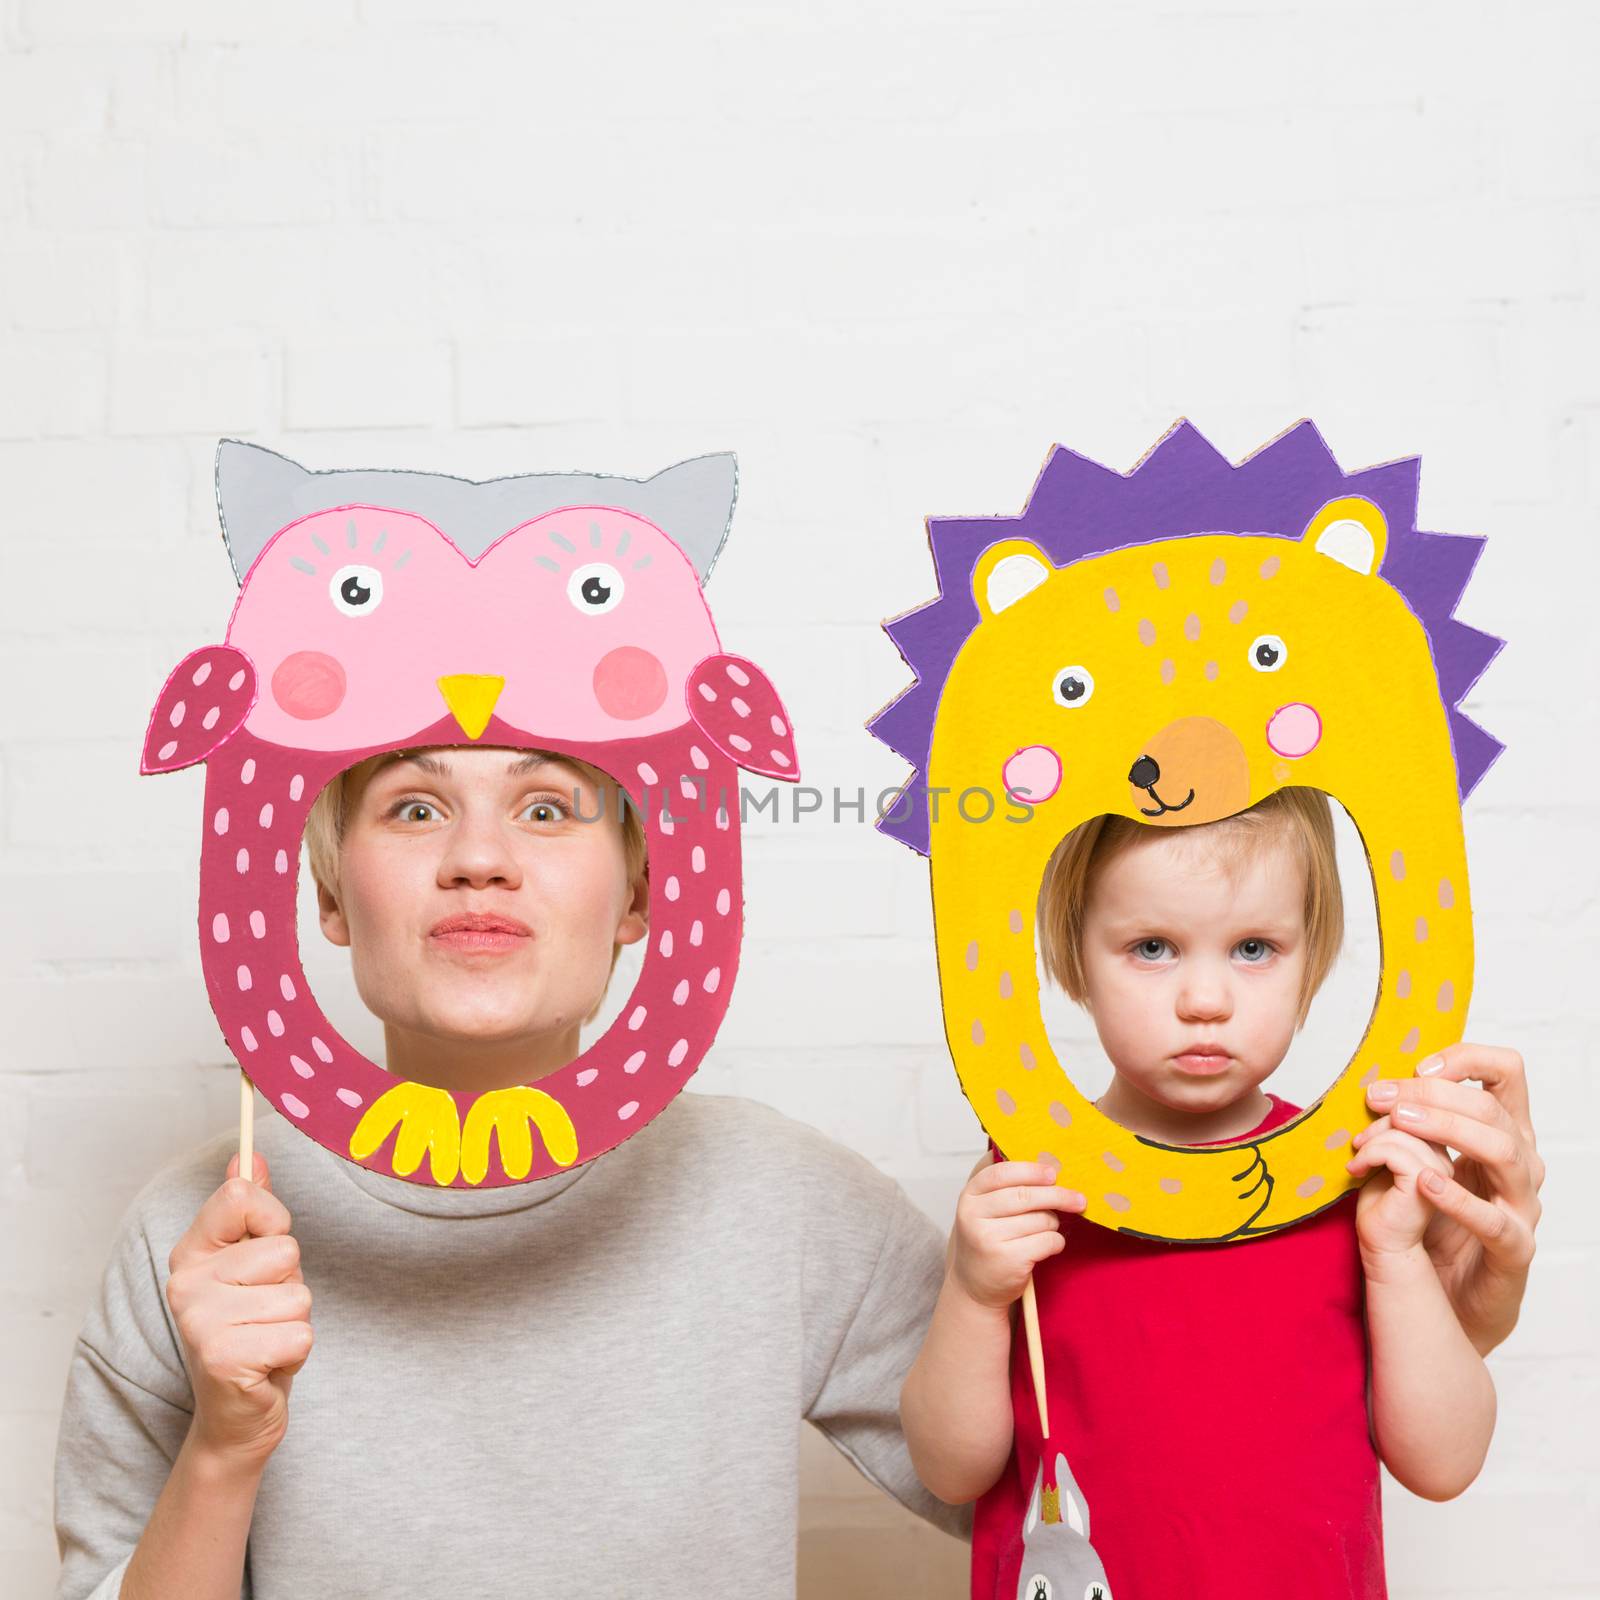 Little blonde girls and mother holding lion mask on white background